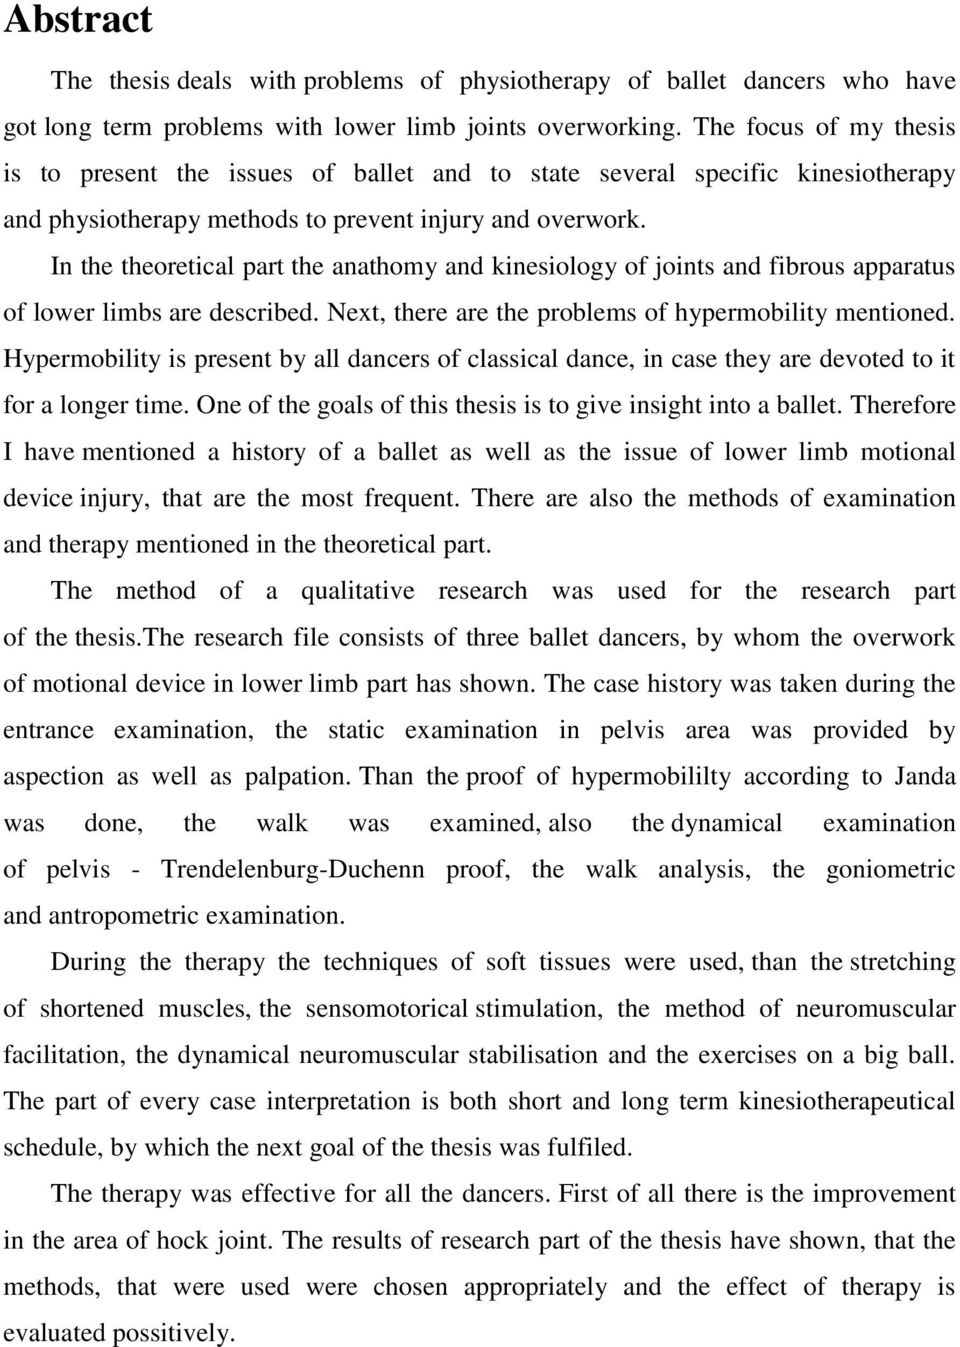 In the theoretical part the anathomy and kinesiology of joints and fibrous apparatus of lower limbs are described. Next, there are the problems of hypermobility mentioned.